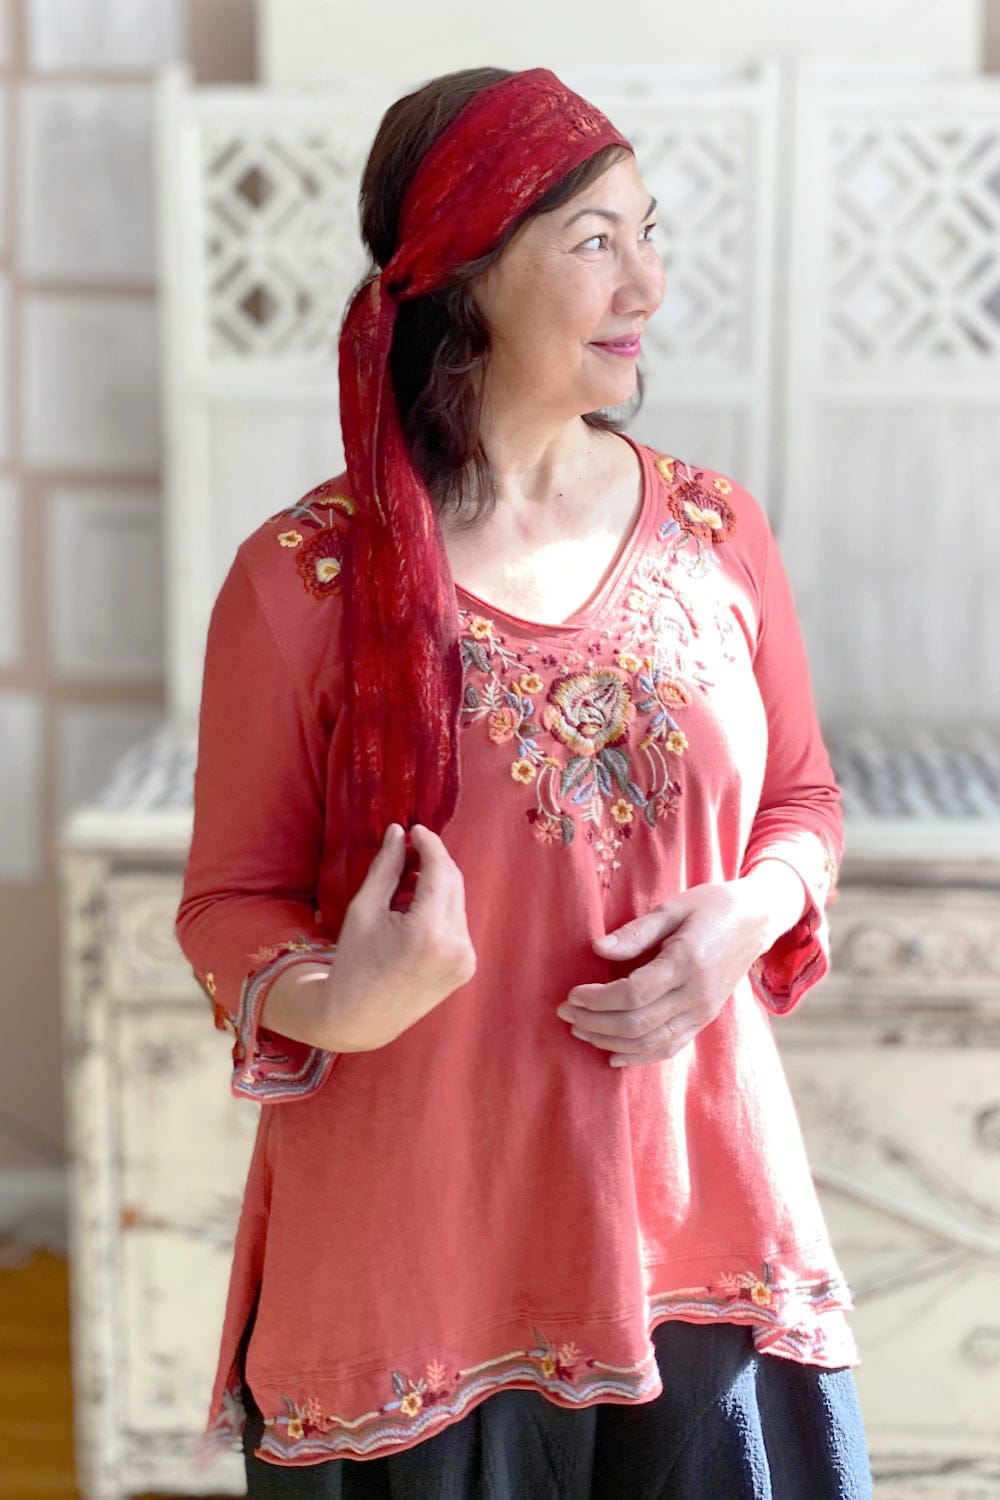 Woman with red head scarf wearing a jersey knit v neck top with embroidery detail.